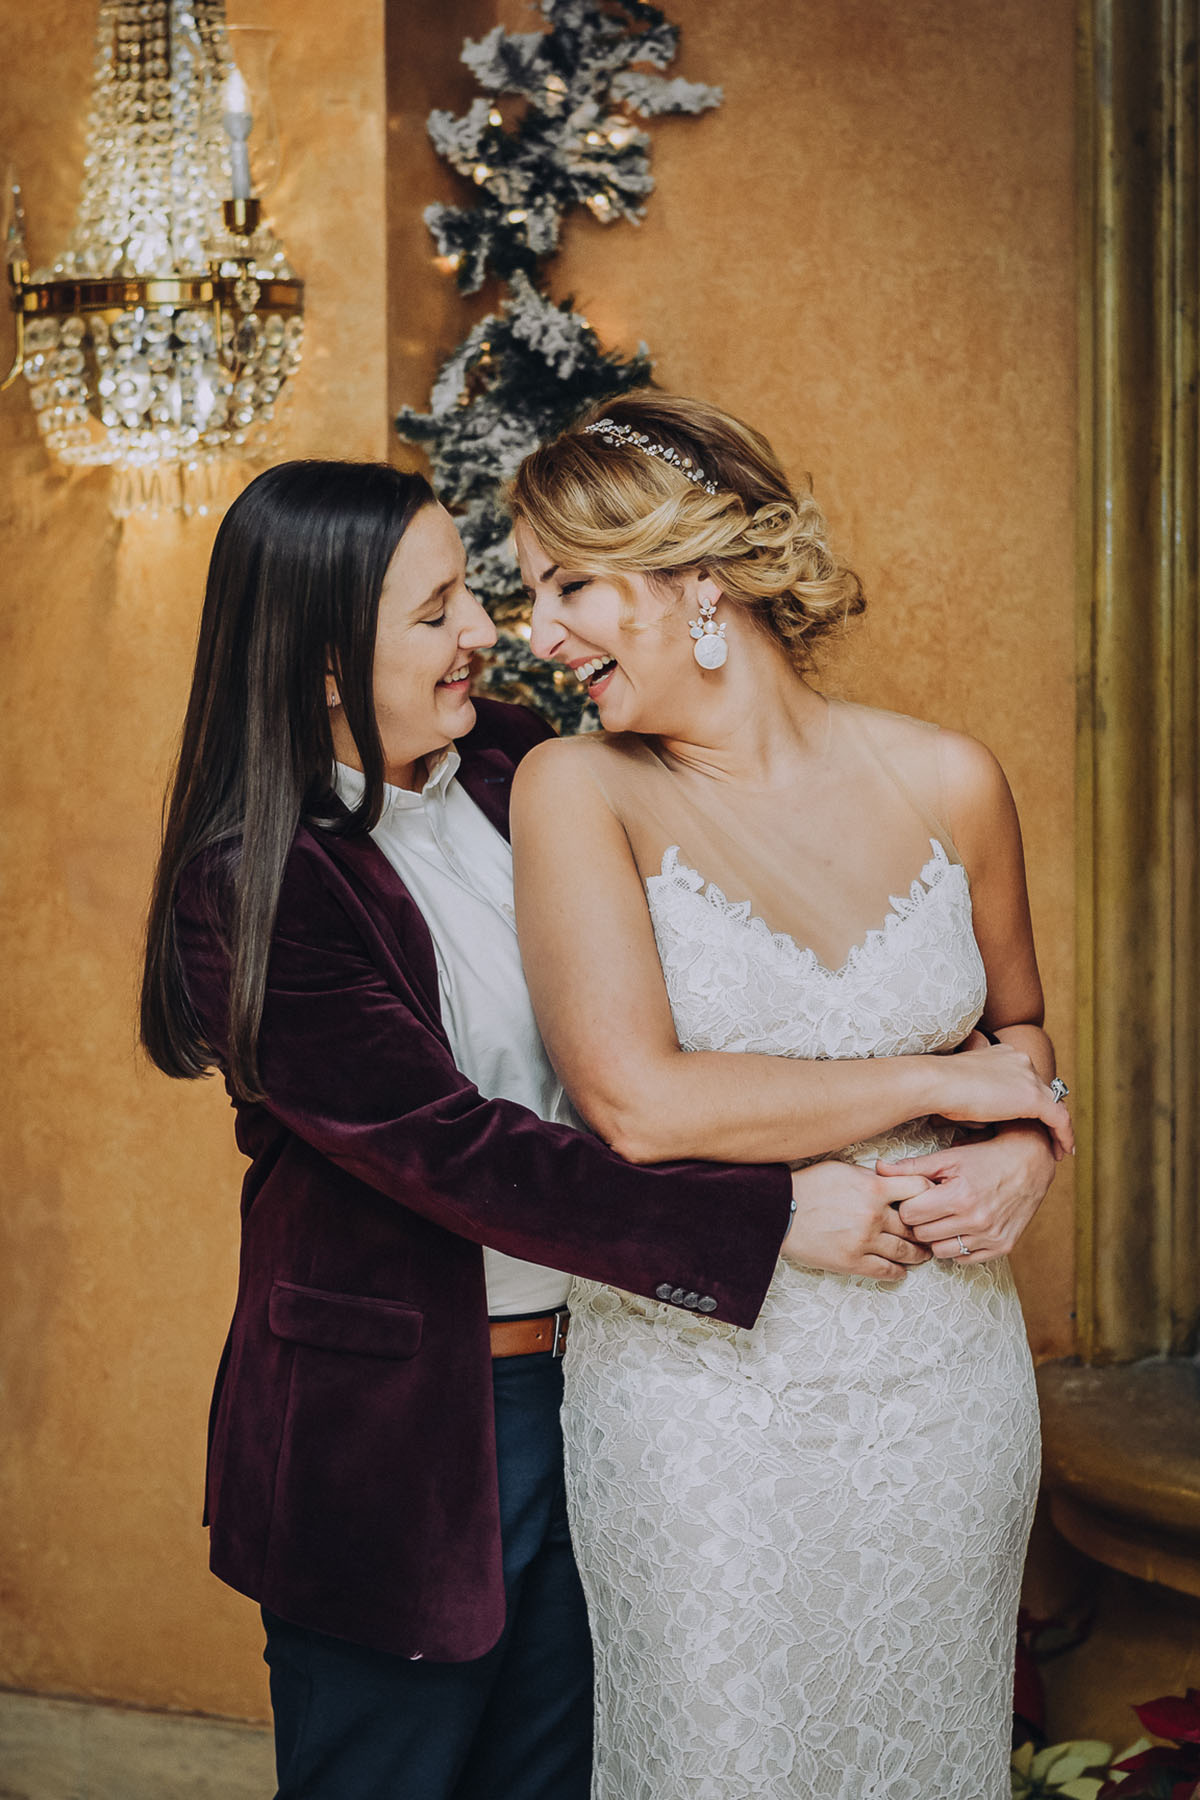 Newly wed brides embrace on their wedding day. Photo: Capture Studio Photography